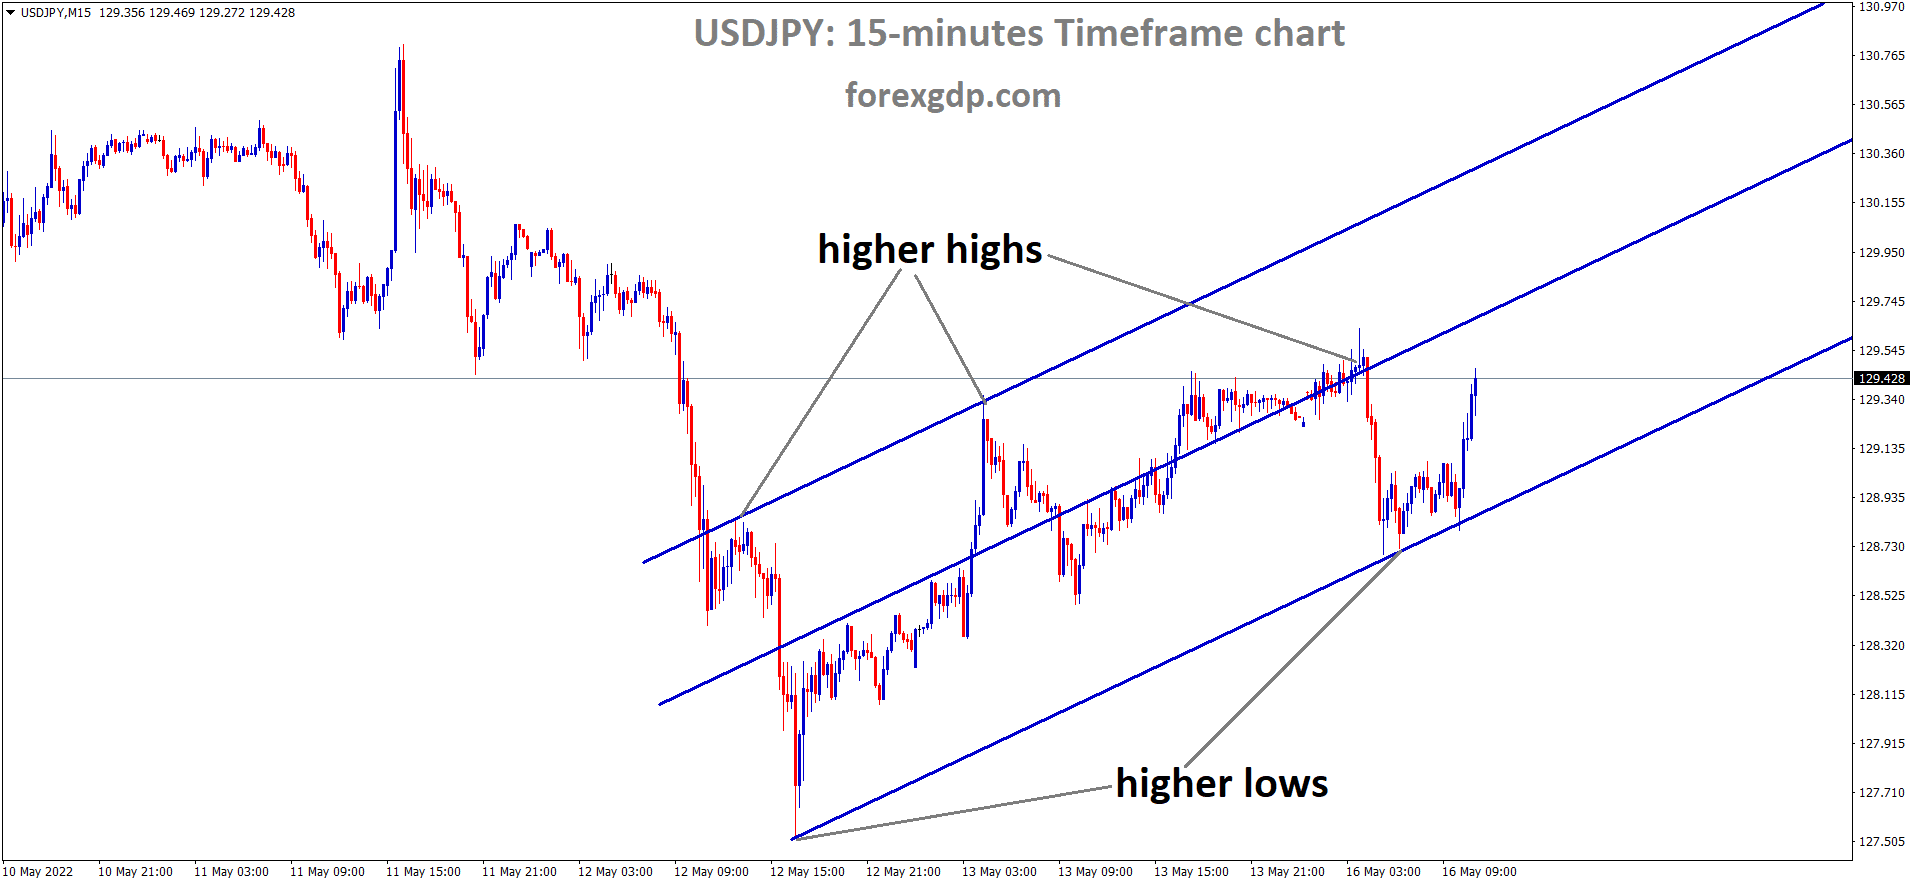 USDJPY M15 Time Frame Analysis Market is moving in an Ascending channel and the Market has rebounded from the higher low area of the Ascending channel